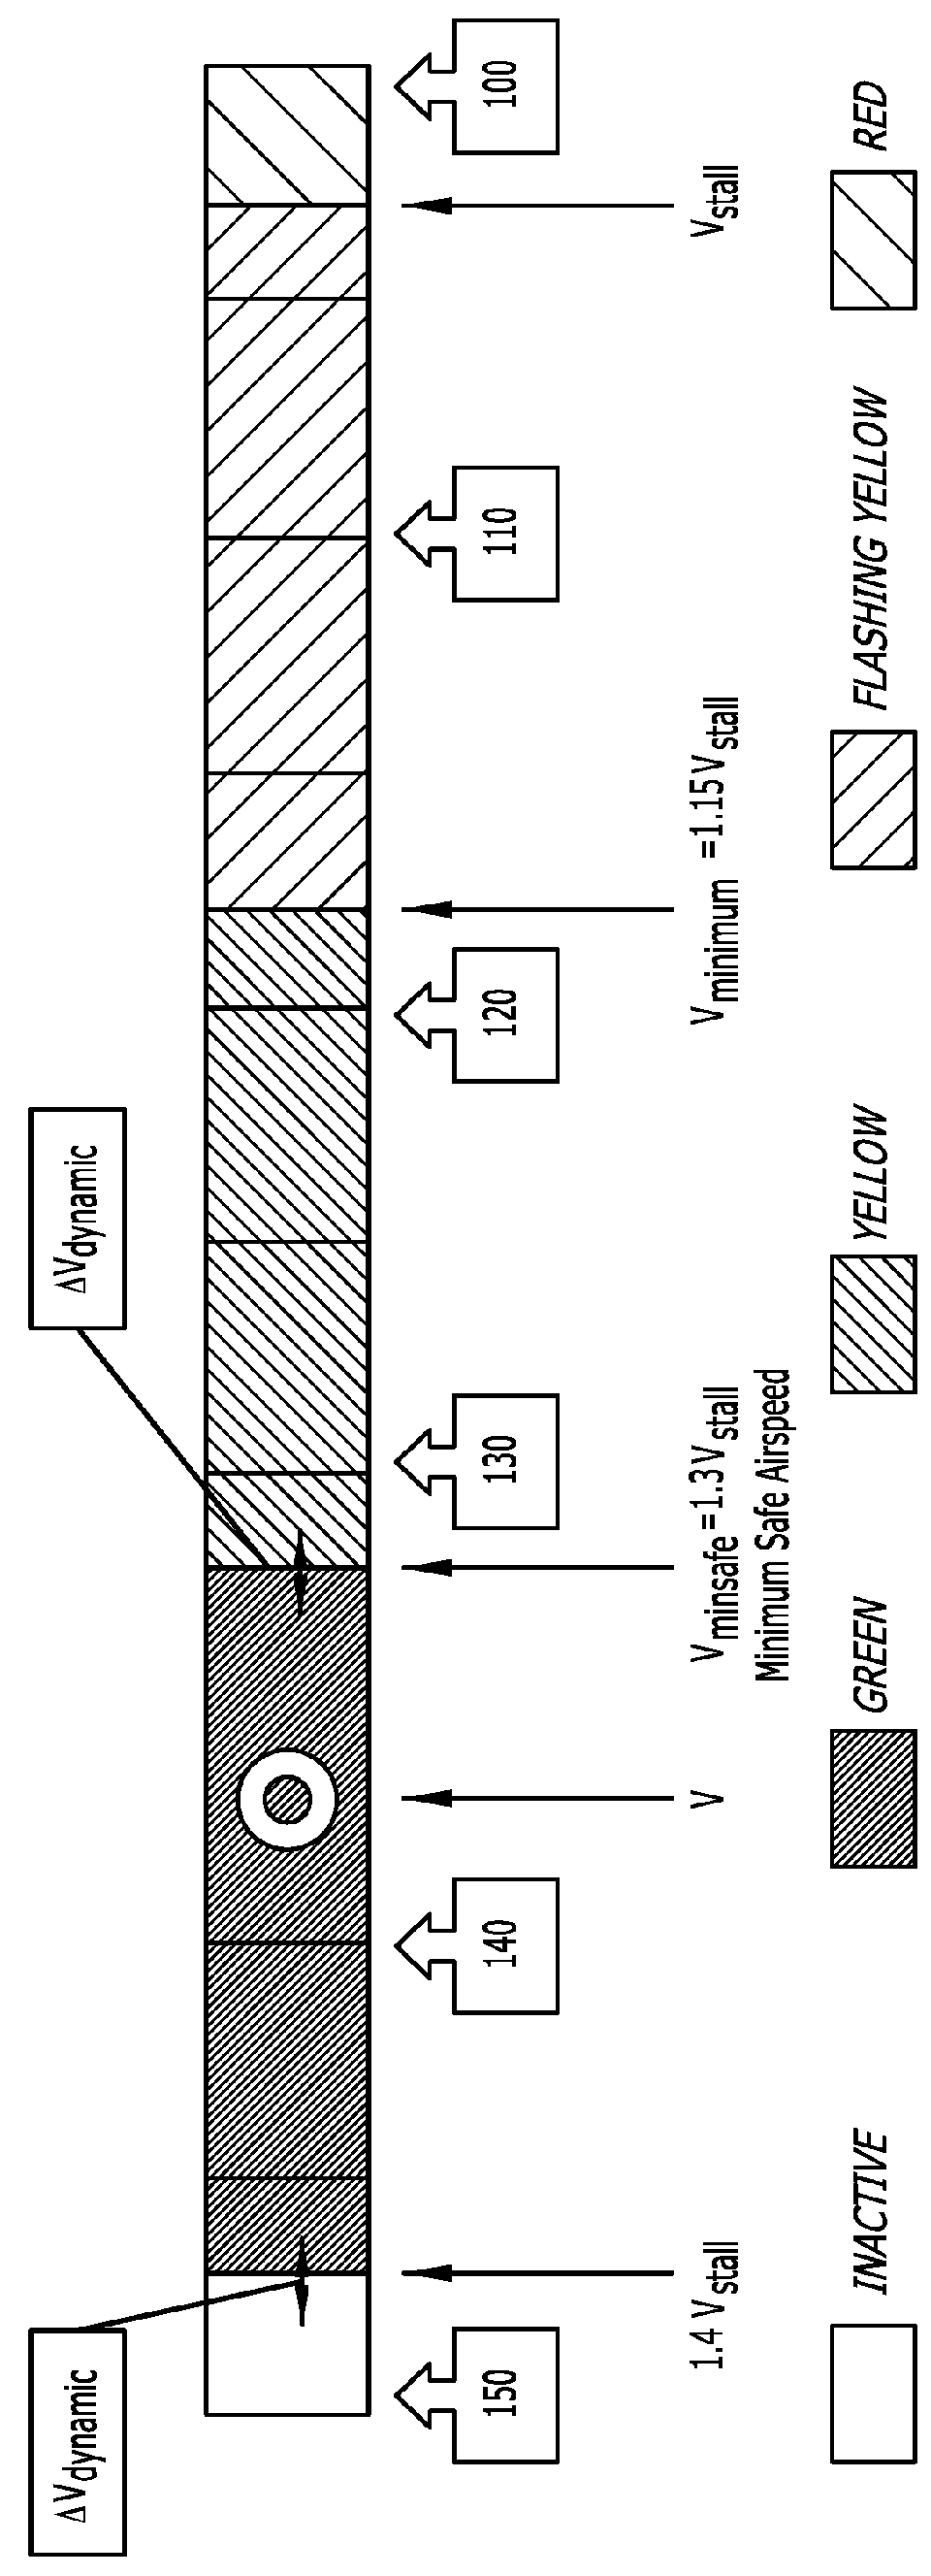 Aircraft Energy State Awareness Display Systems and Methods